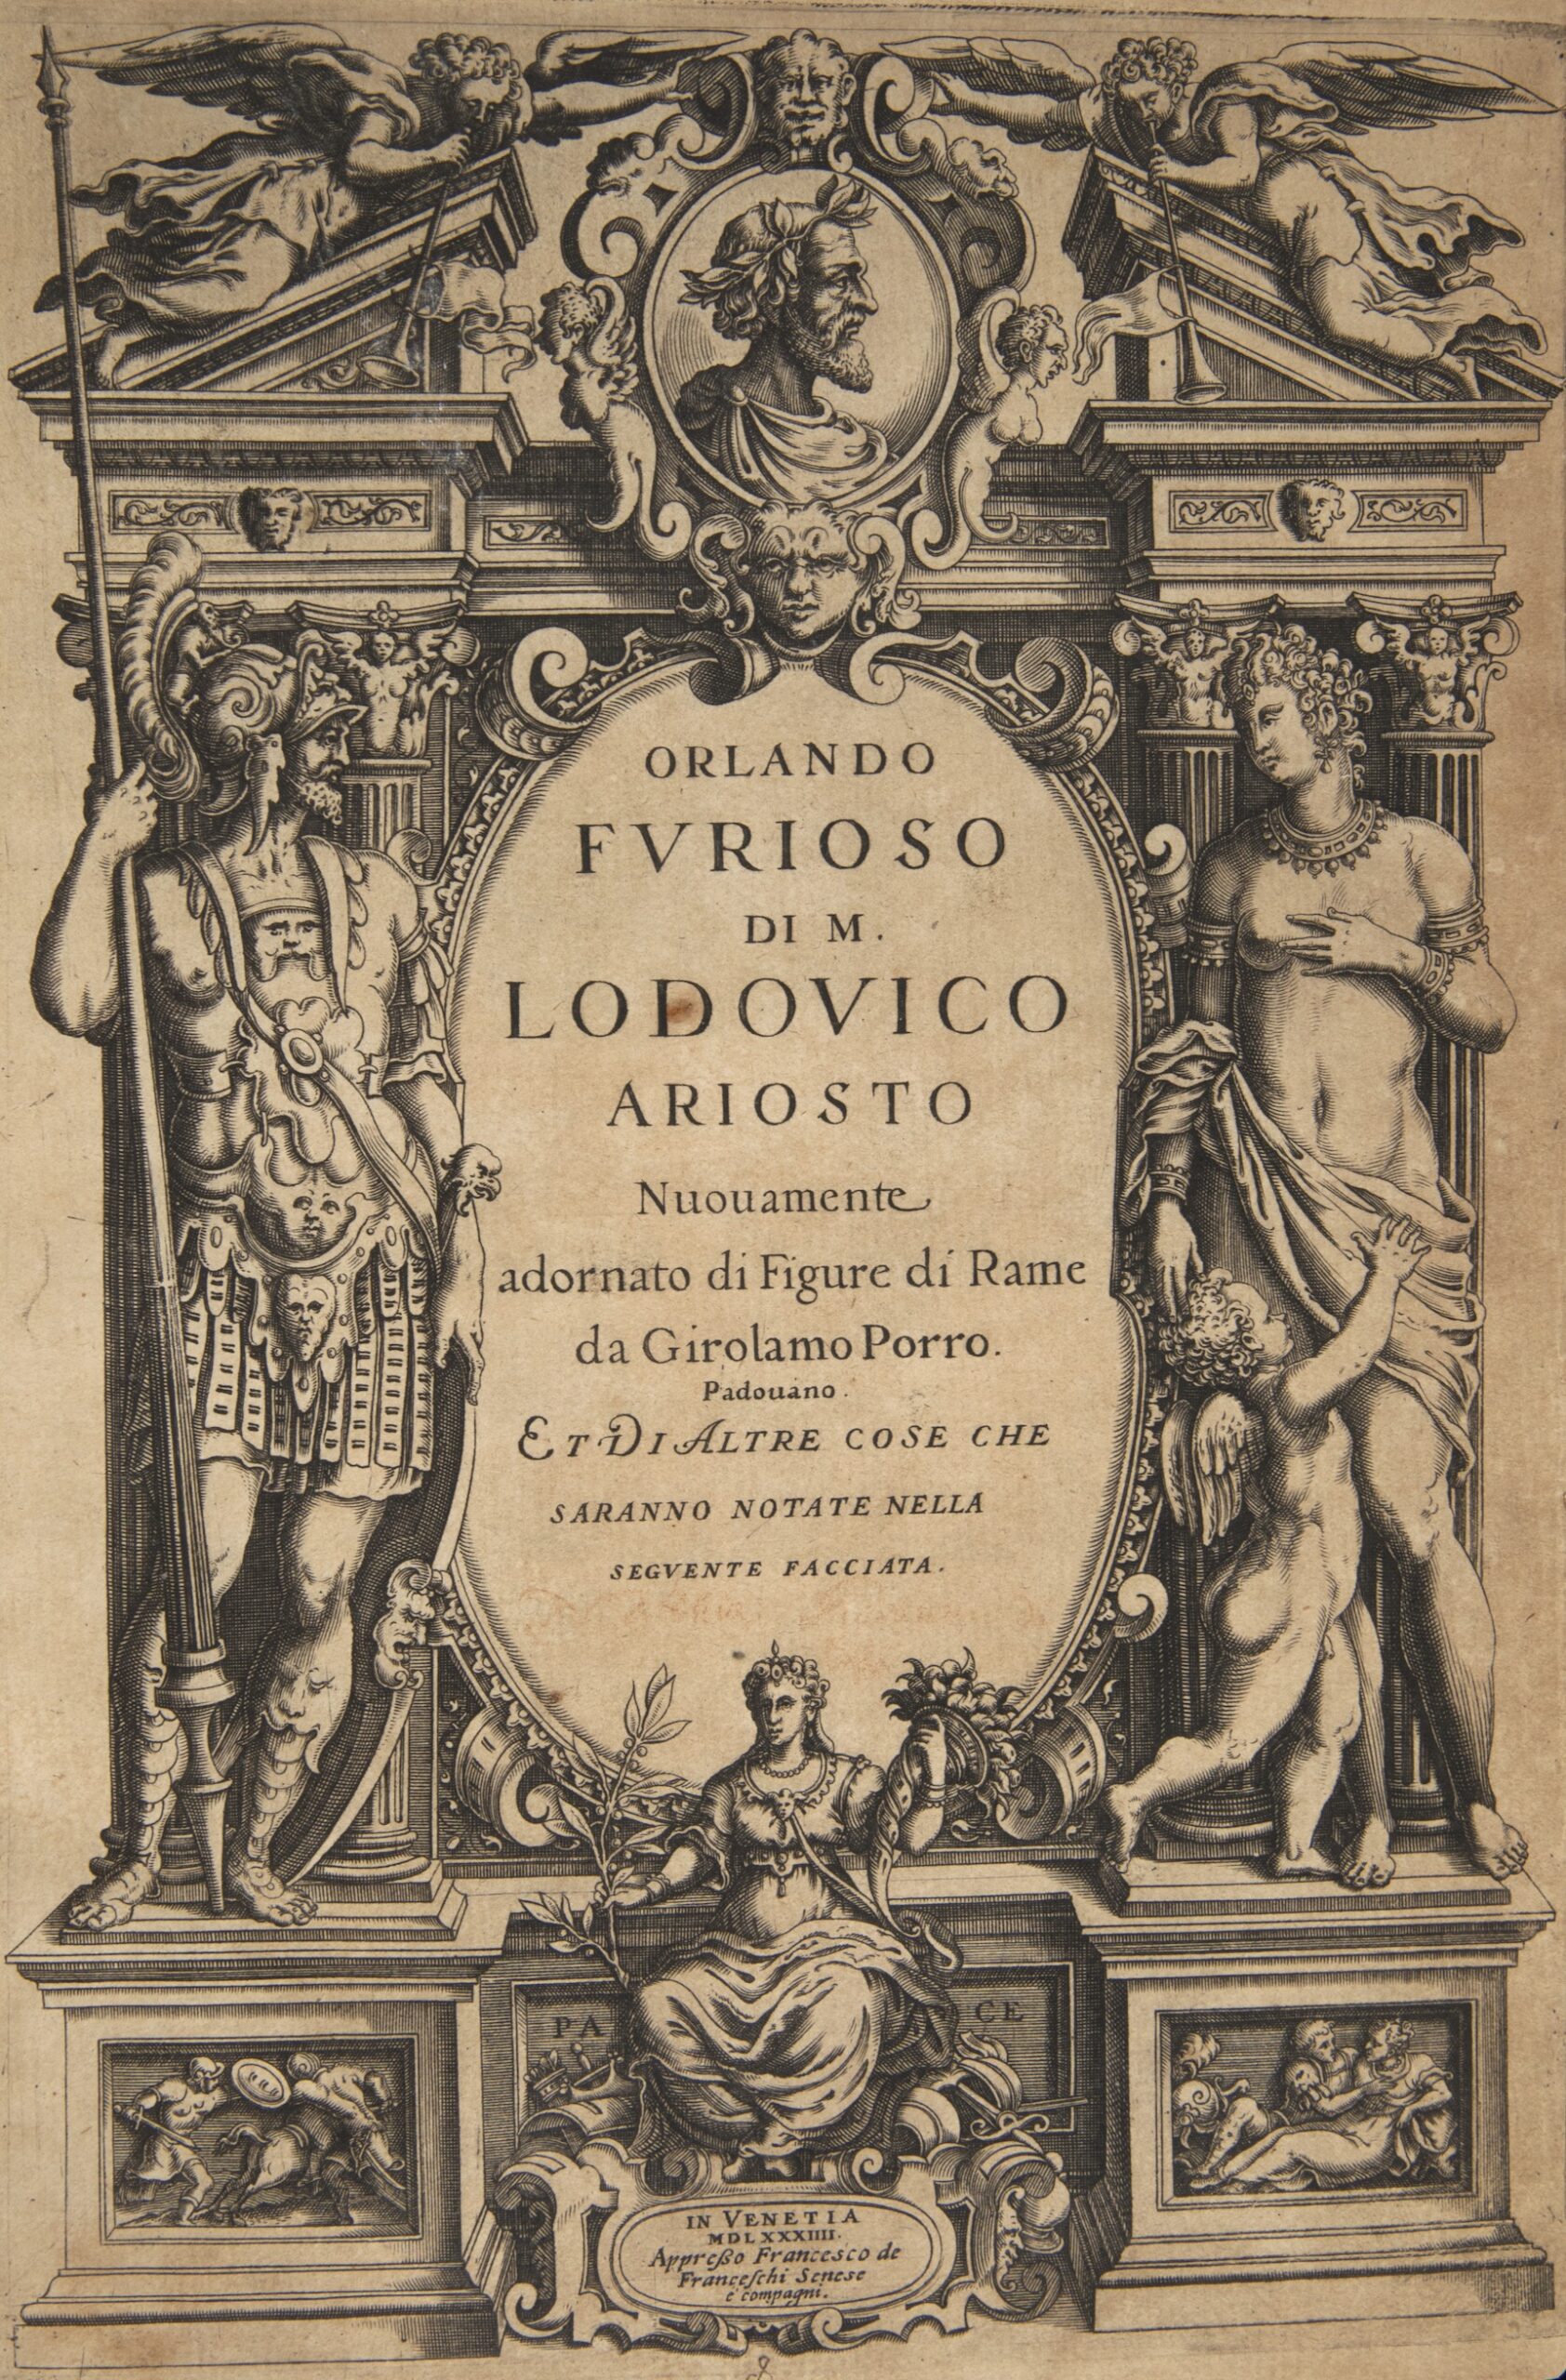 Title page illustrated with figures of a Roman soldier, angel, and partially nude woman.